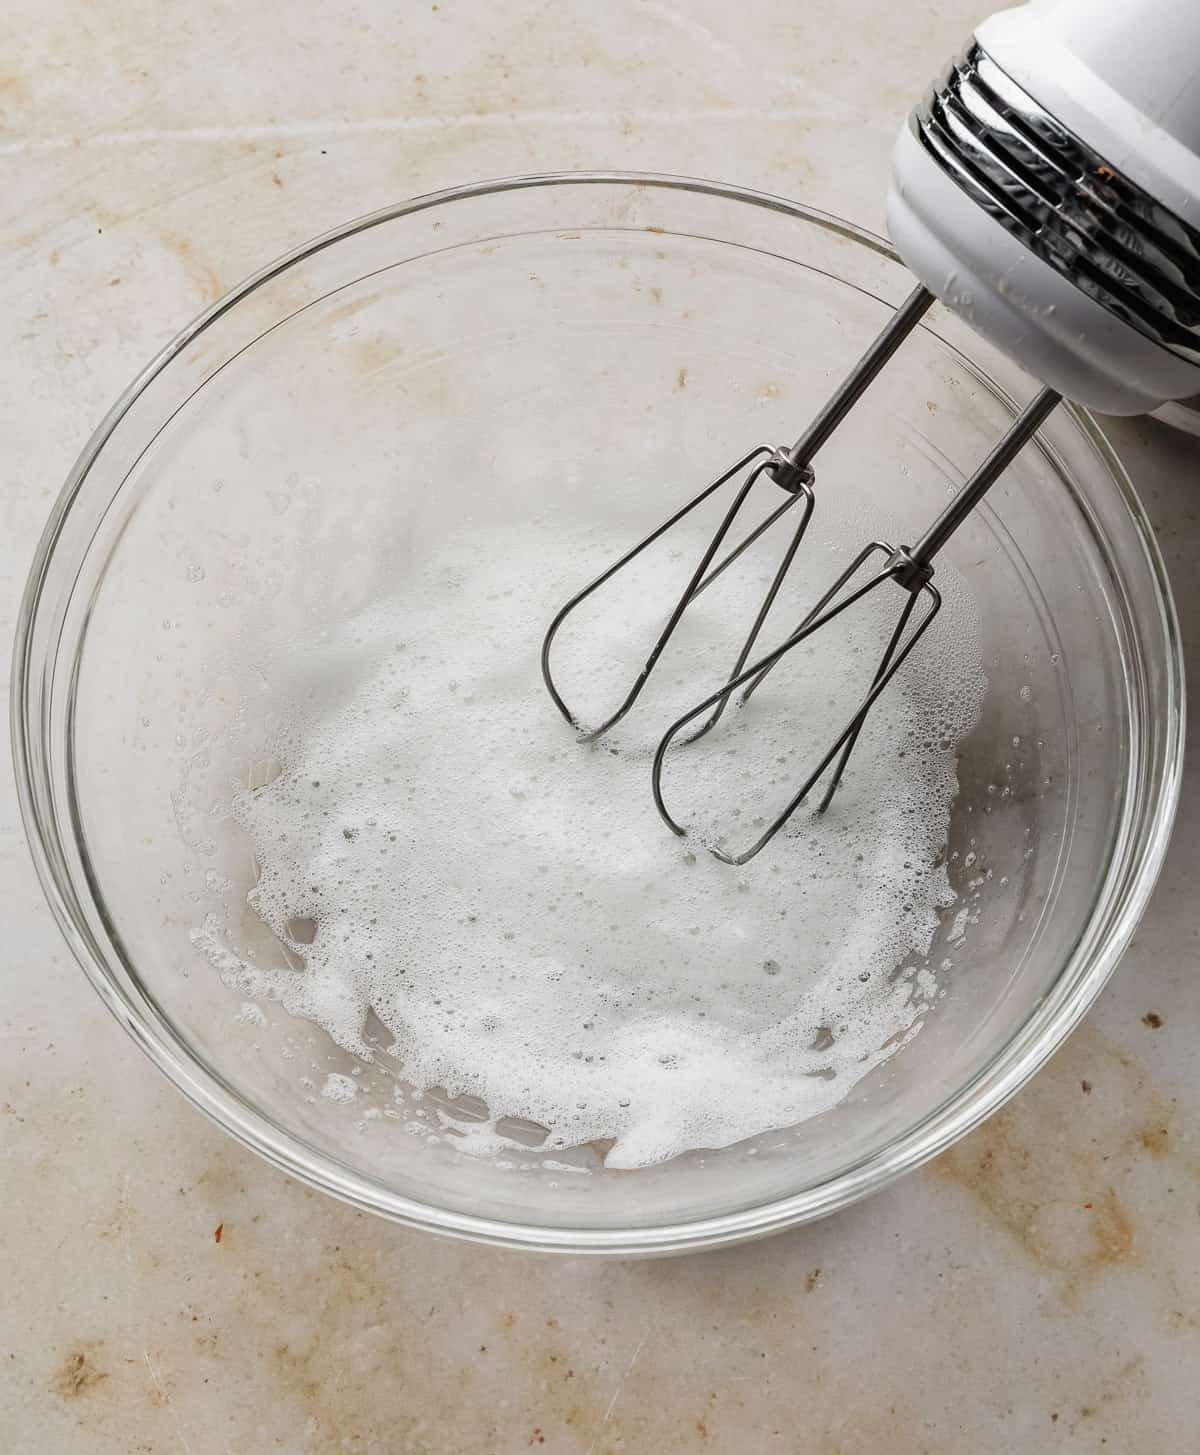 A hand mixer whipping egg whites until frothy in a glass bowl.